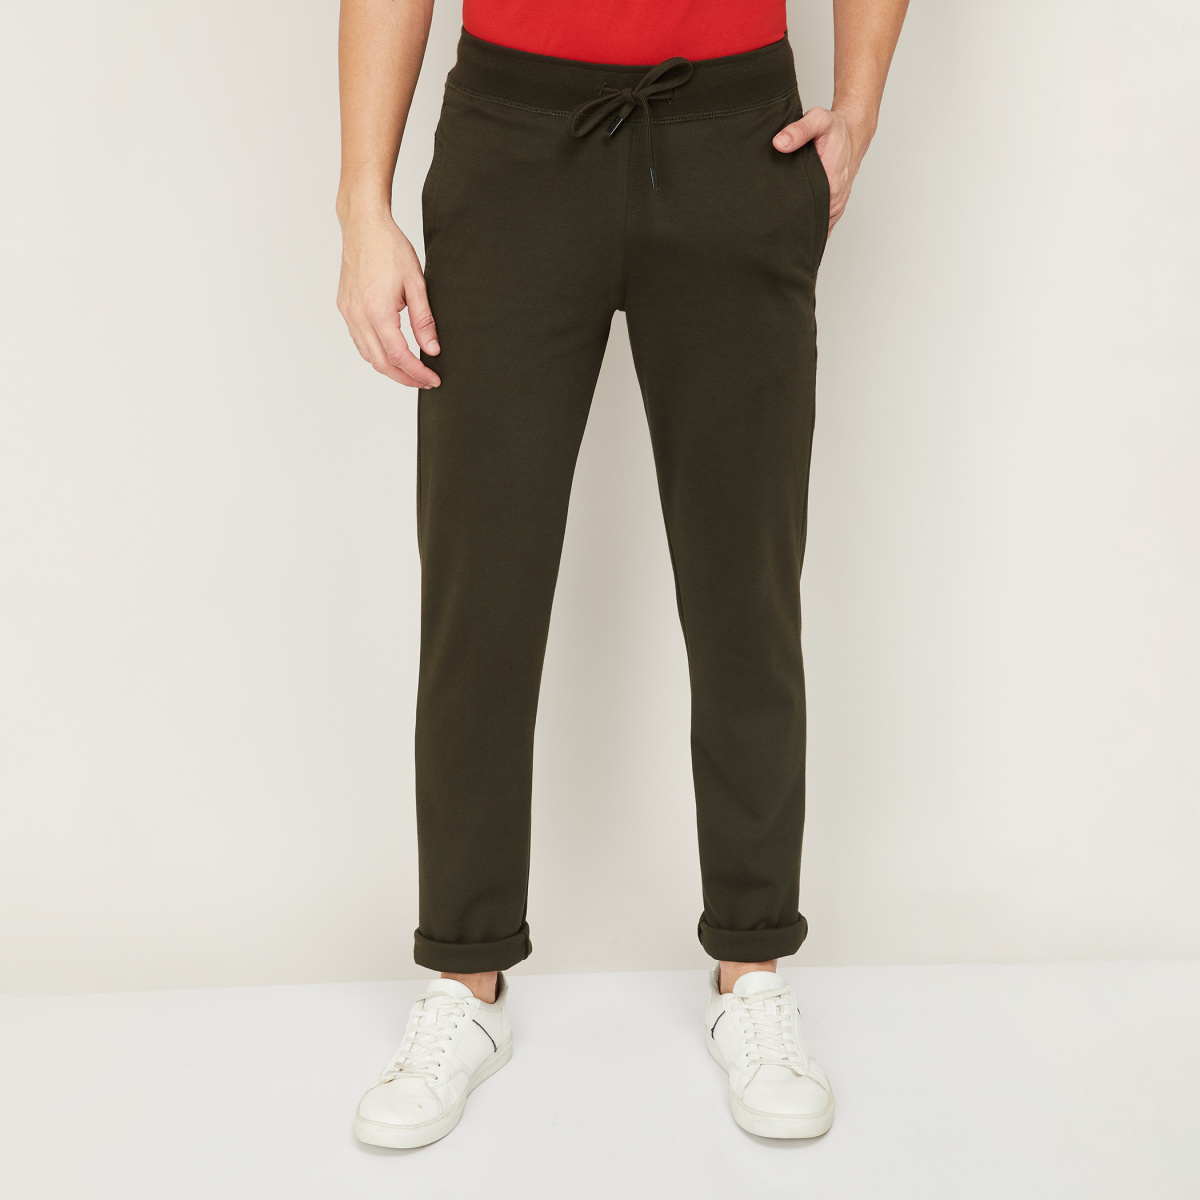 Buy Free Authority Avengers featured Navy Trackpant for Men online